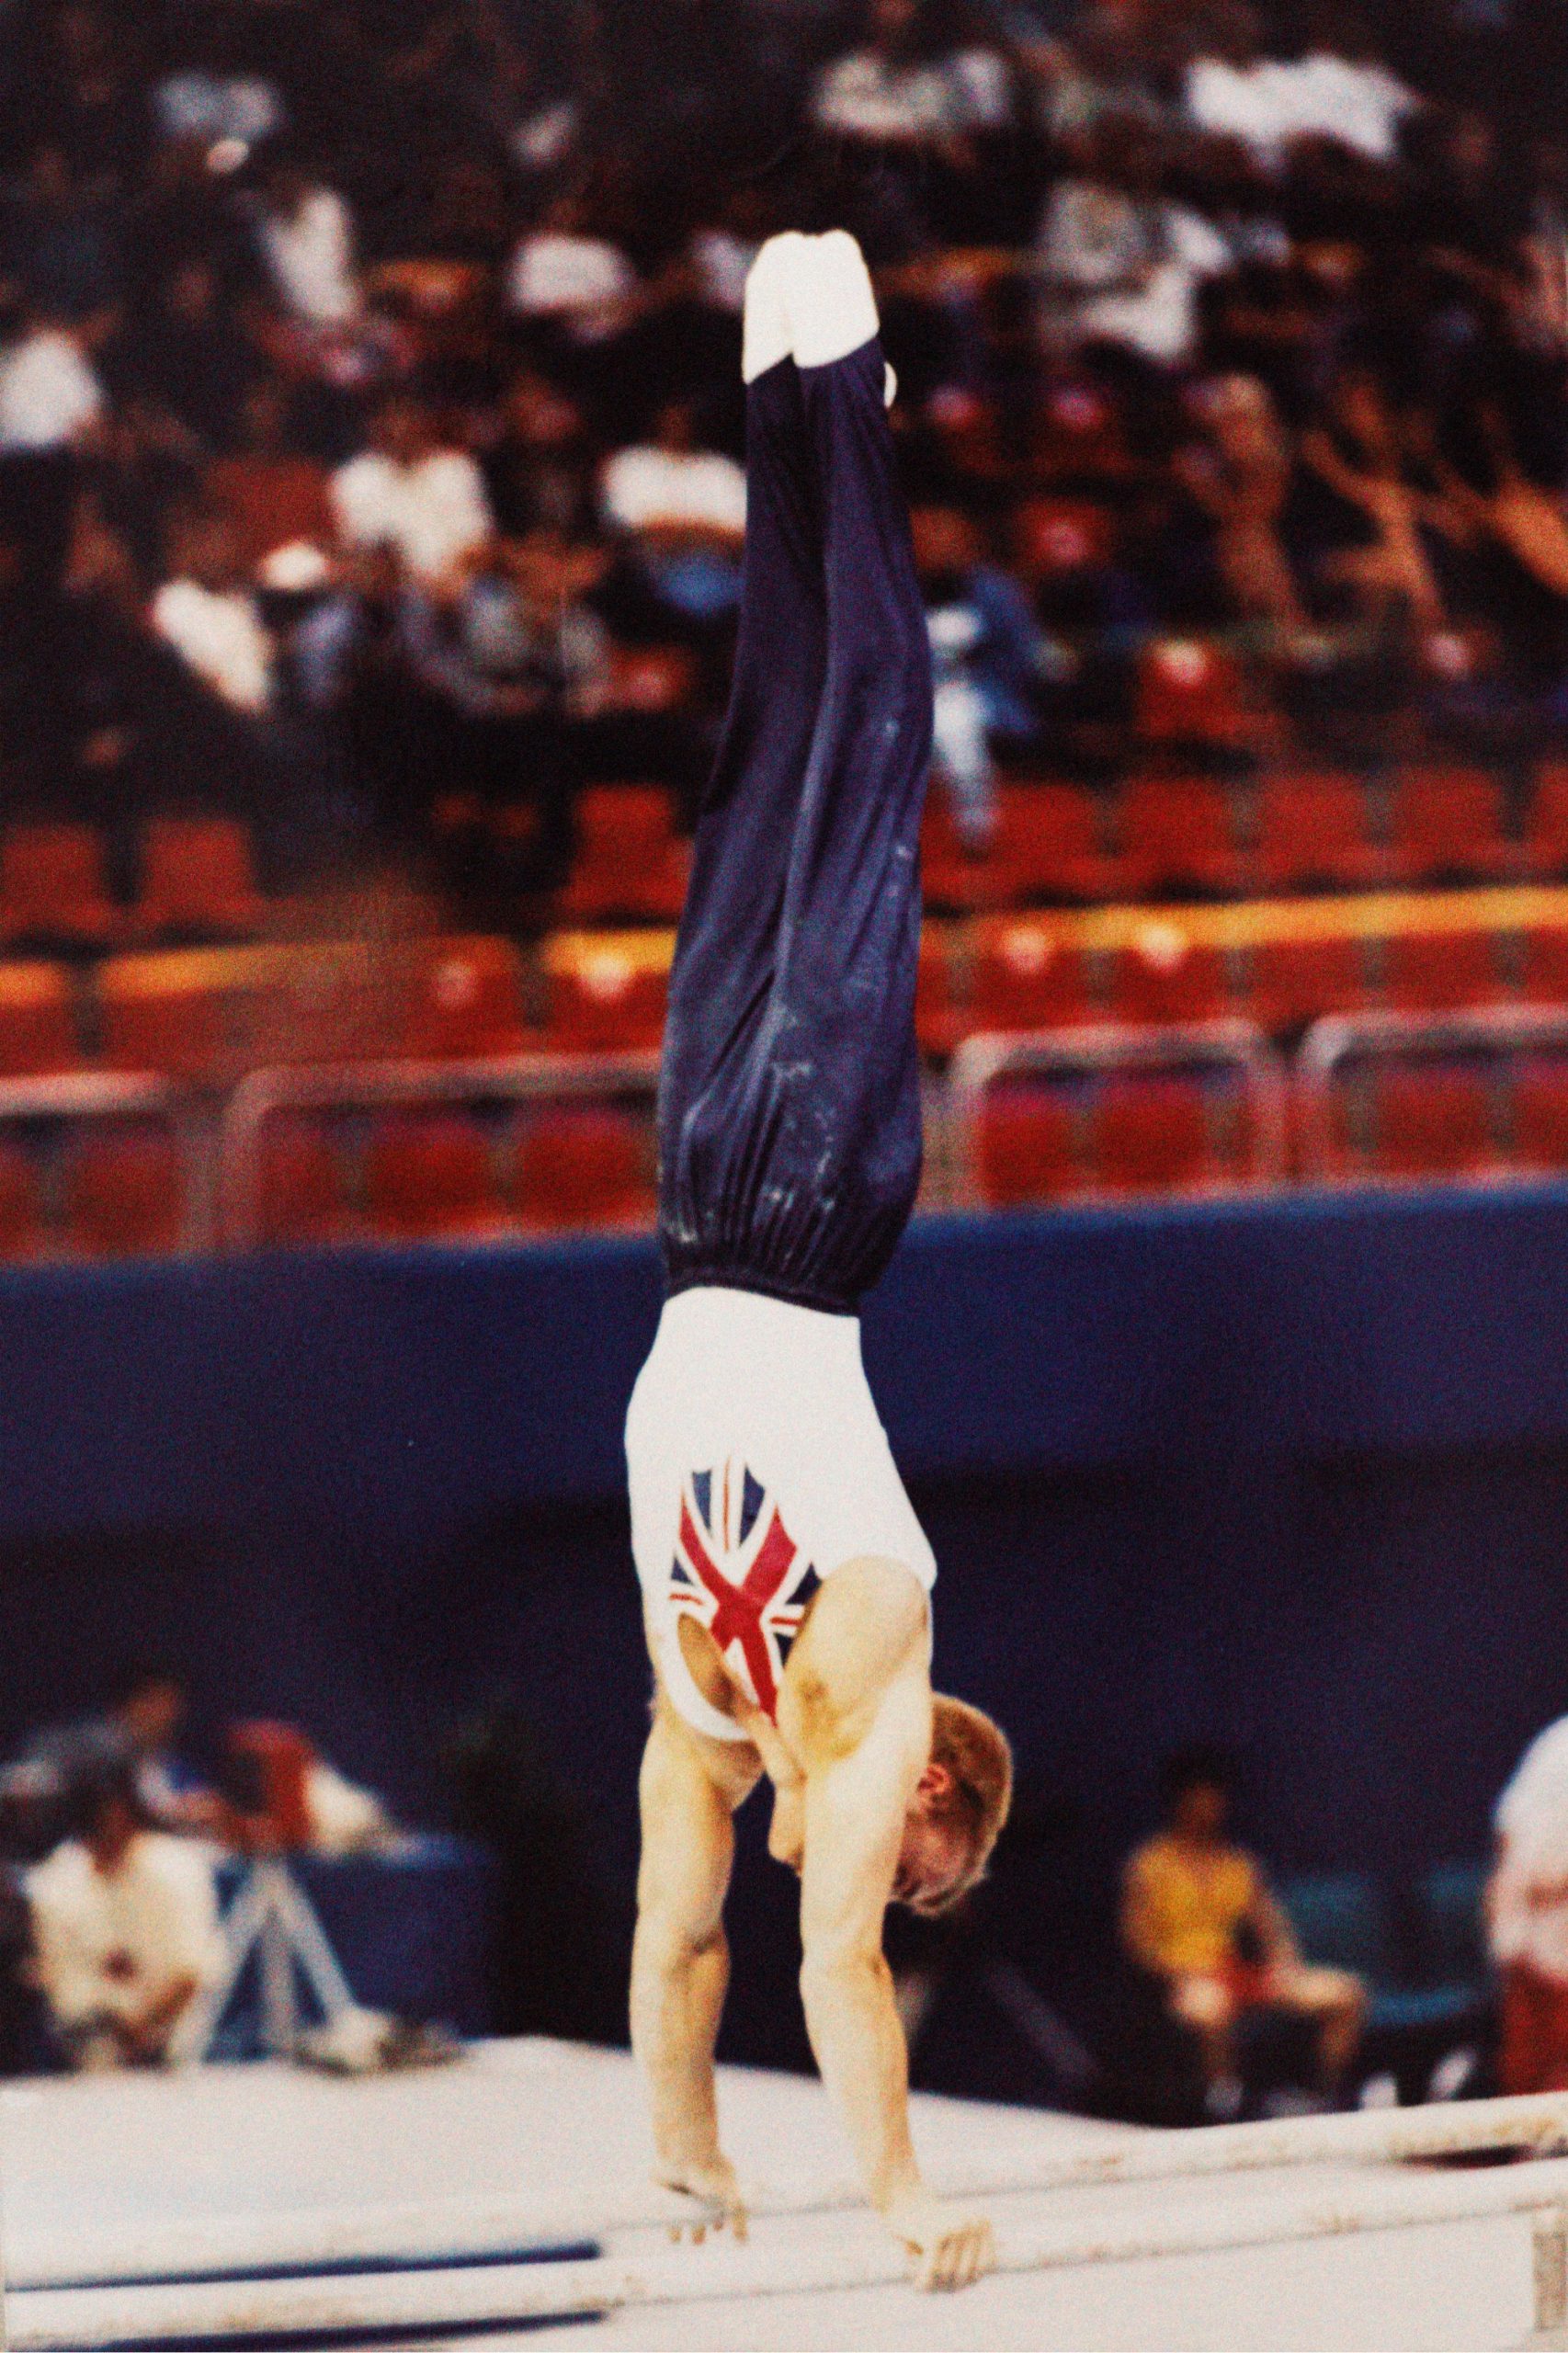 Kevin competing for GB on Parallel Bars